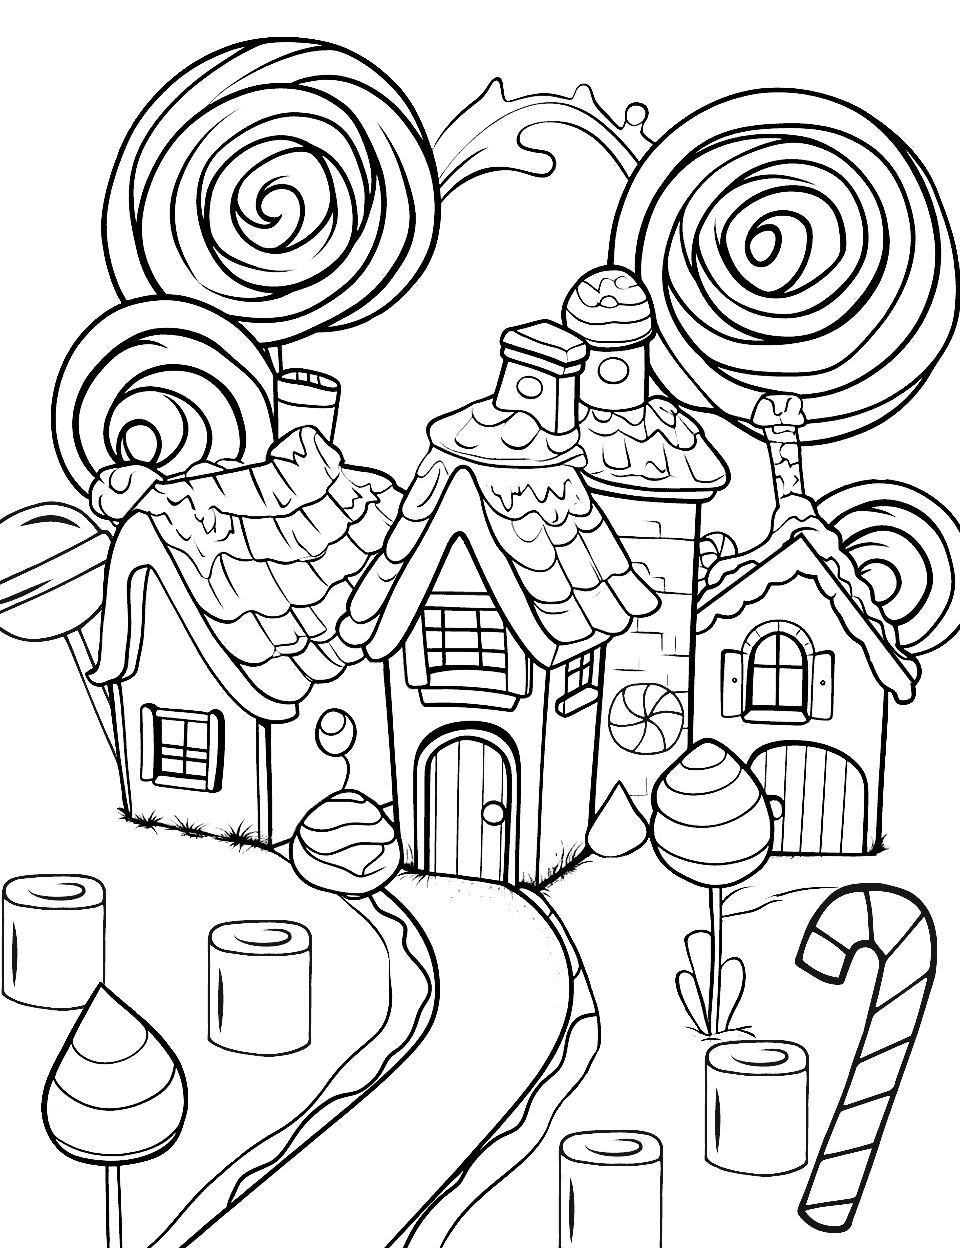 Candyland Adventure Candy Coloring Page - A pathway leading through a fantastical land filled with oversized candy and sweets.